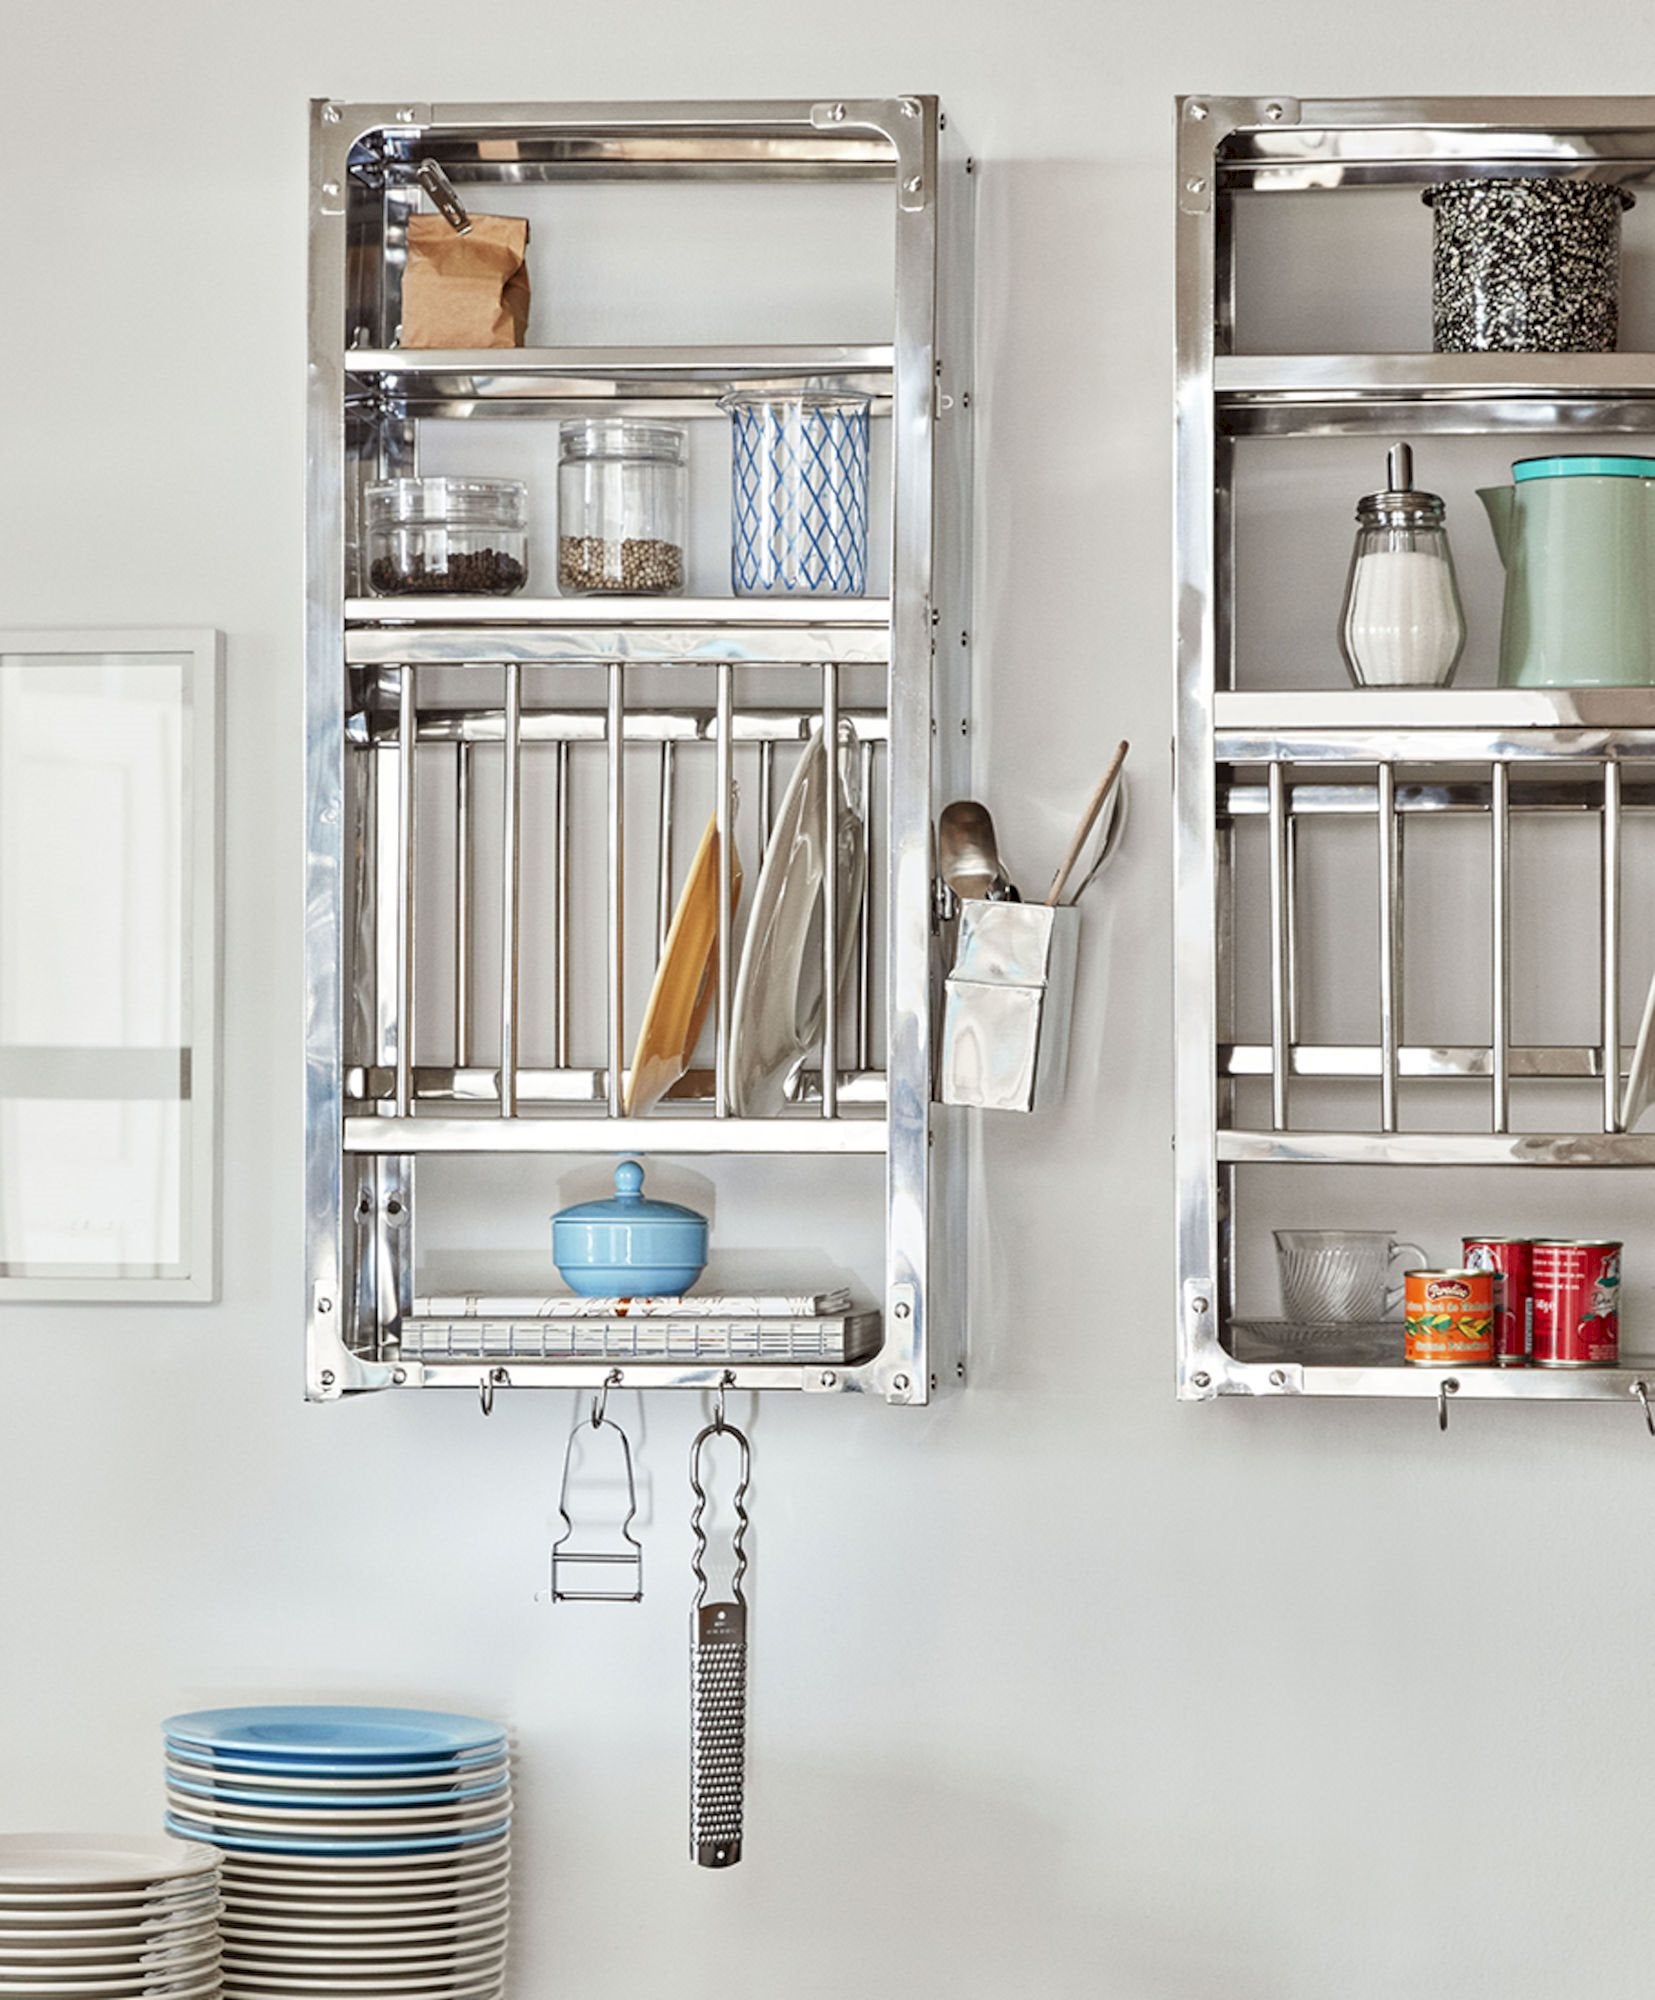 Space-Saving Gadgets That Every Kitchen Needs